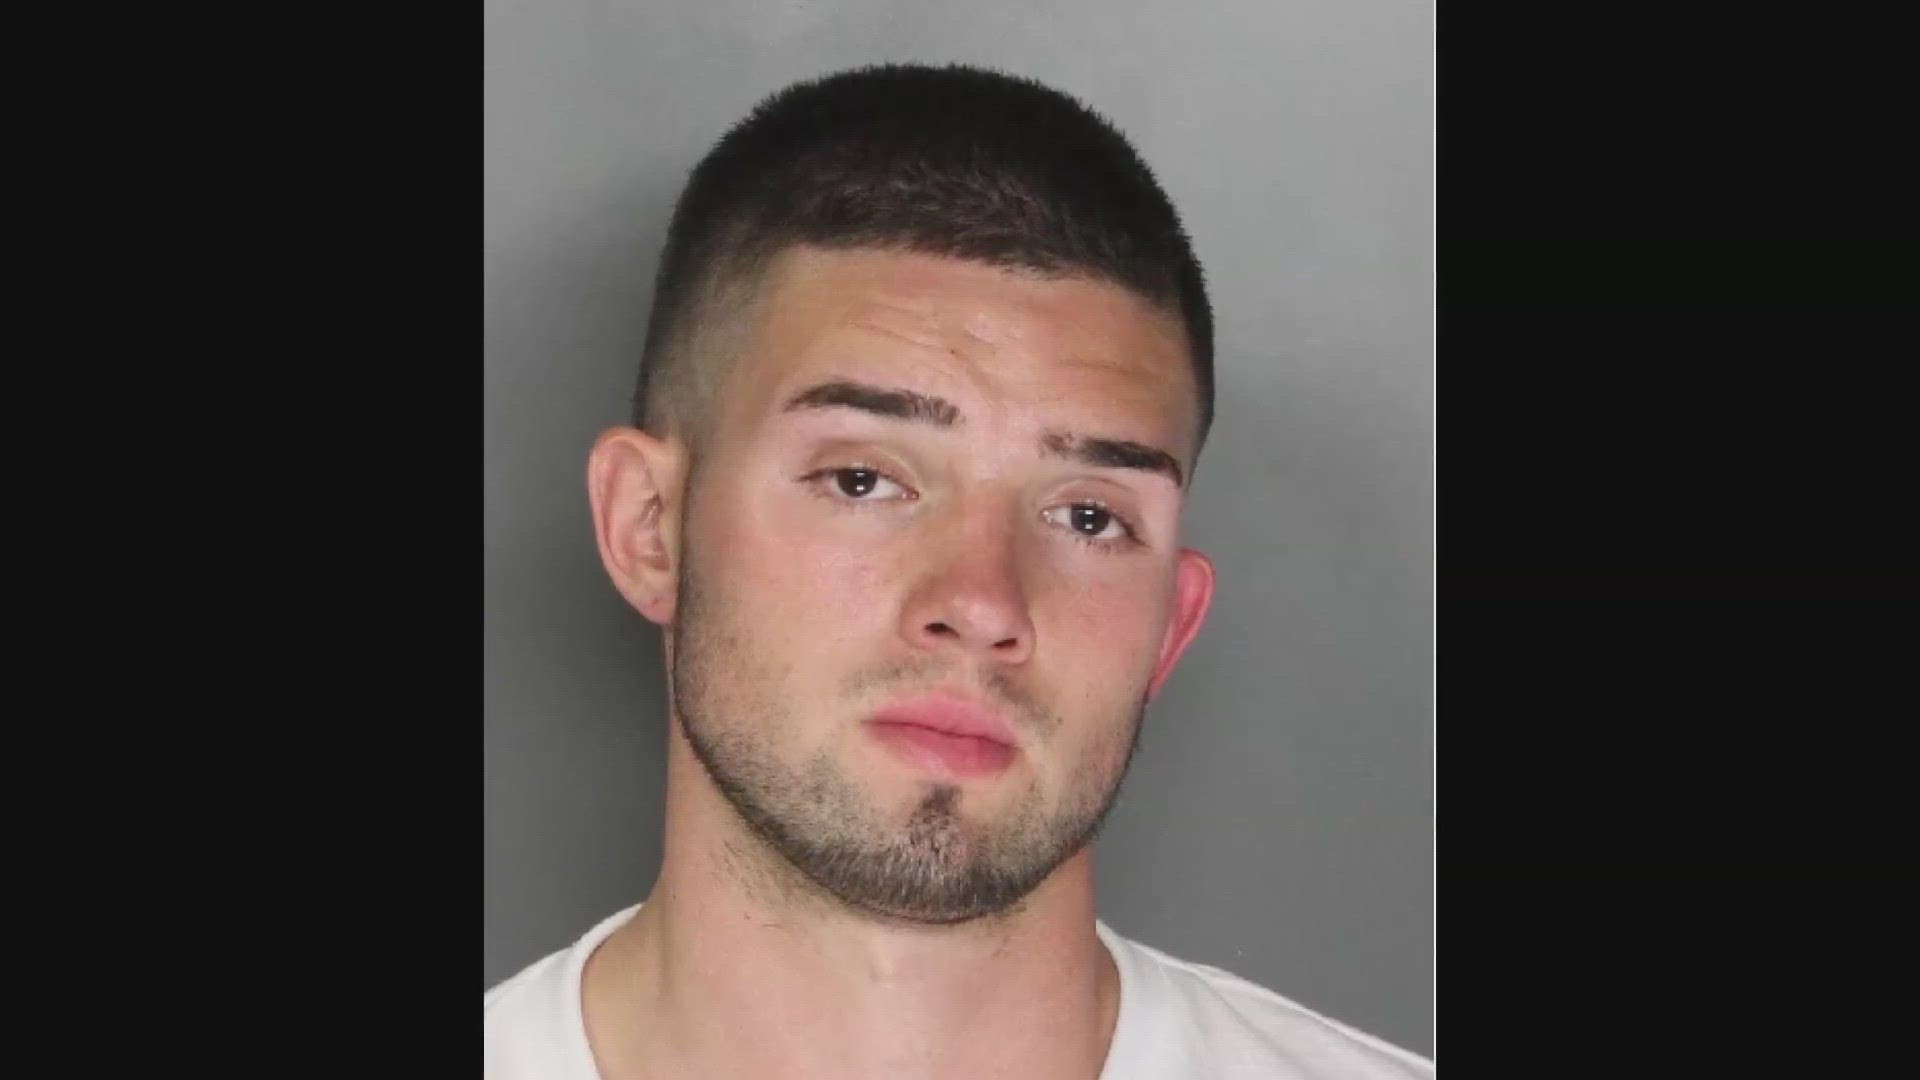 The Roseville Police Department says Jackson Pinney was arrested around 4 p.m. Thursday near the intersection of Douglas Boulevard and Auburn-Folsom Road.